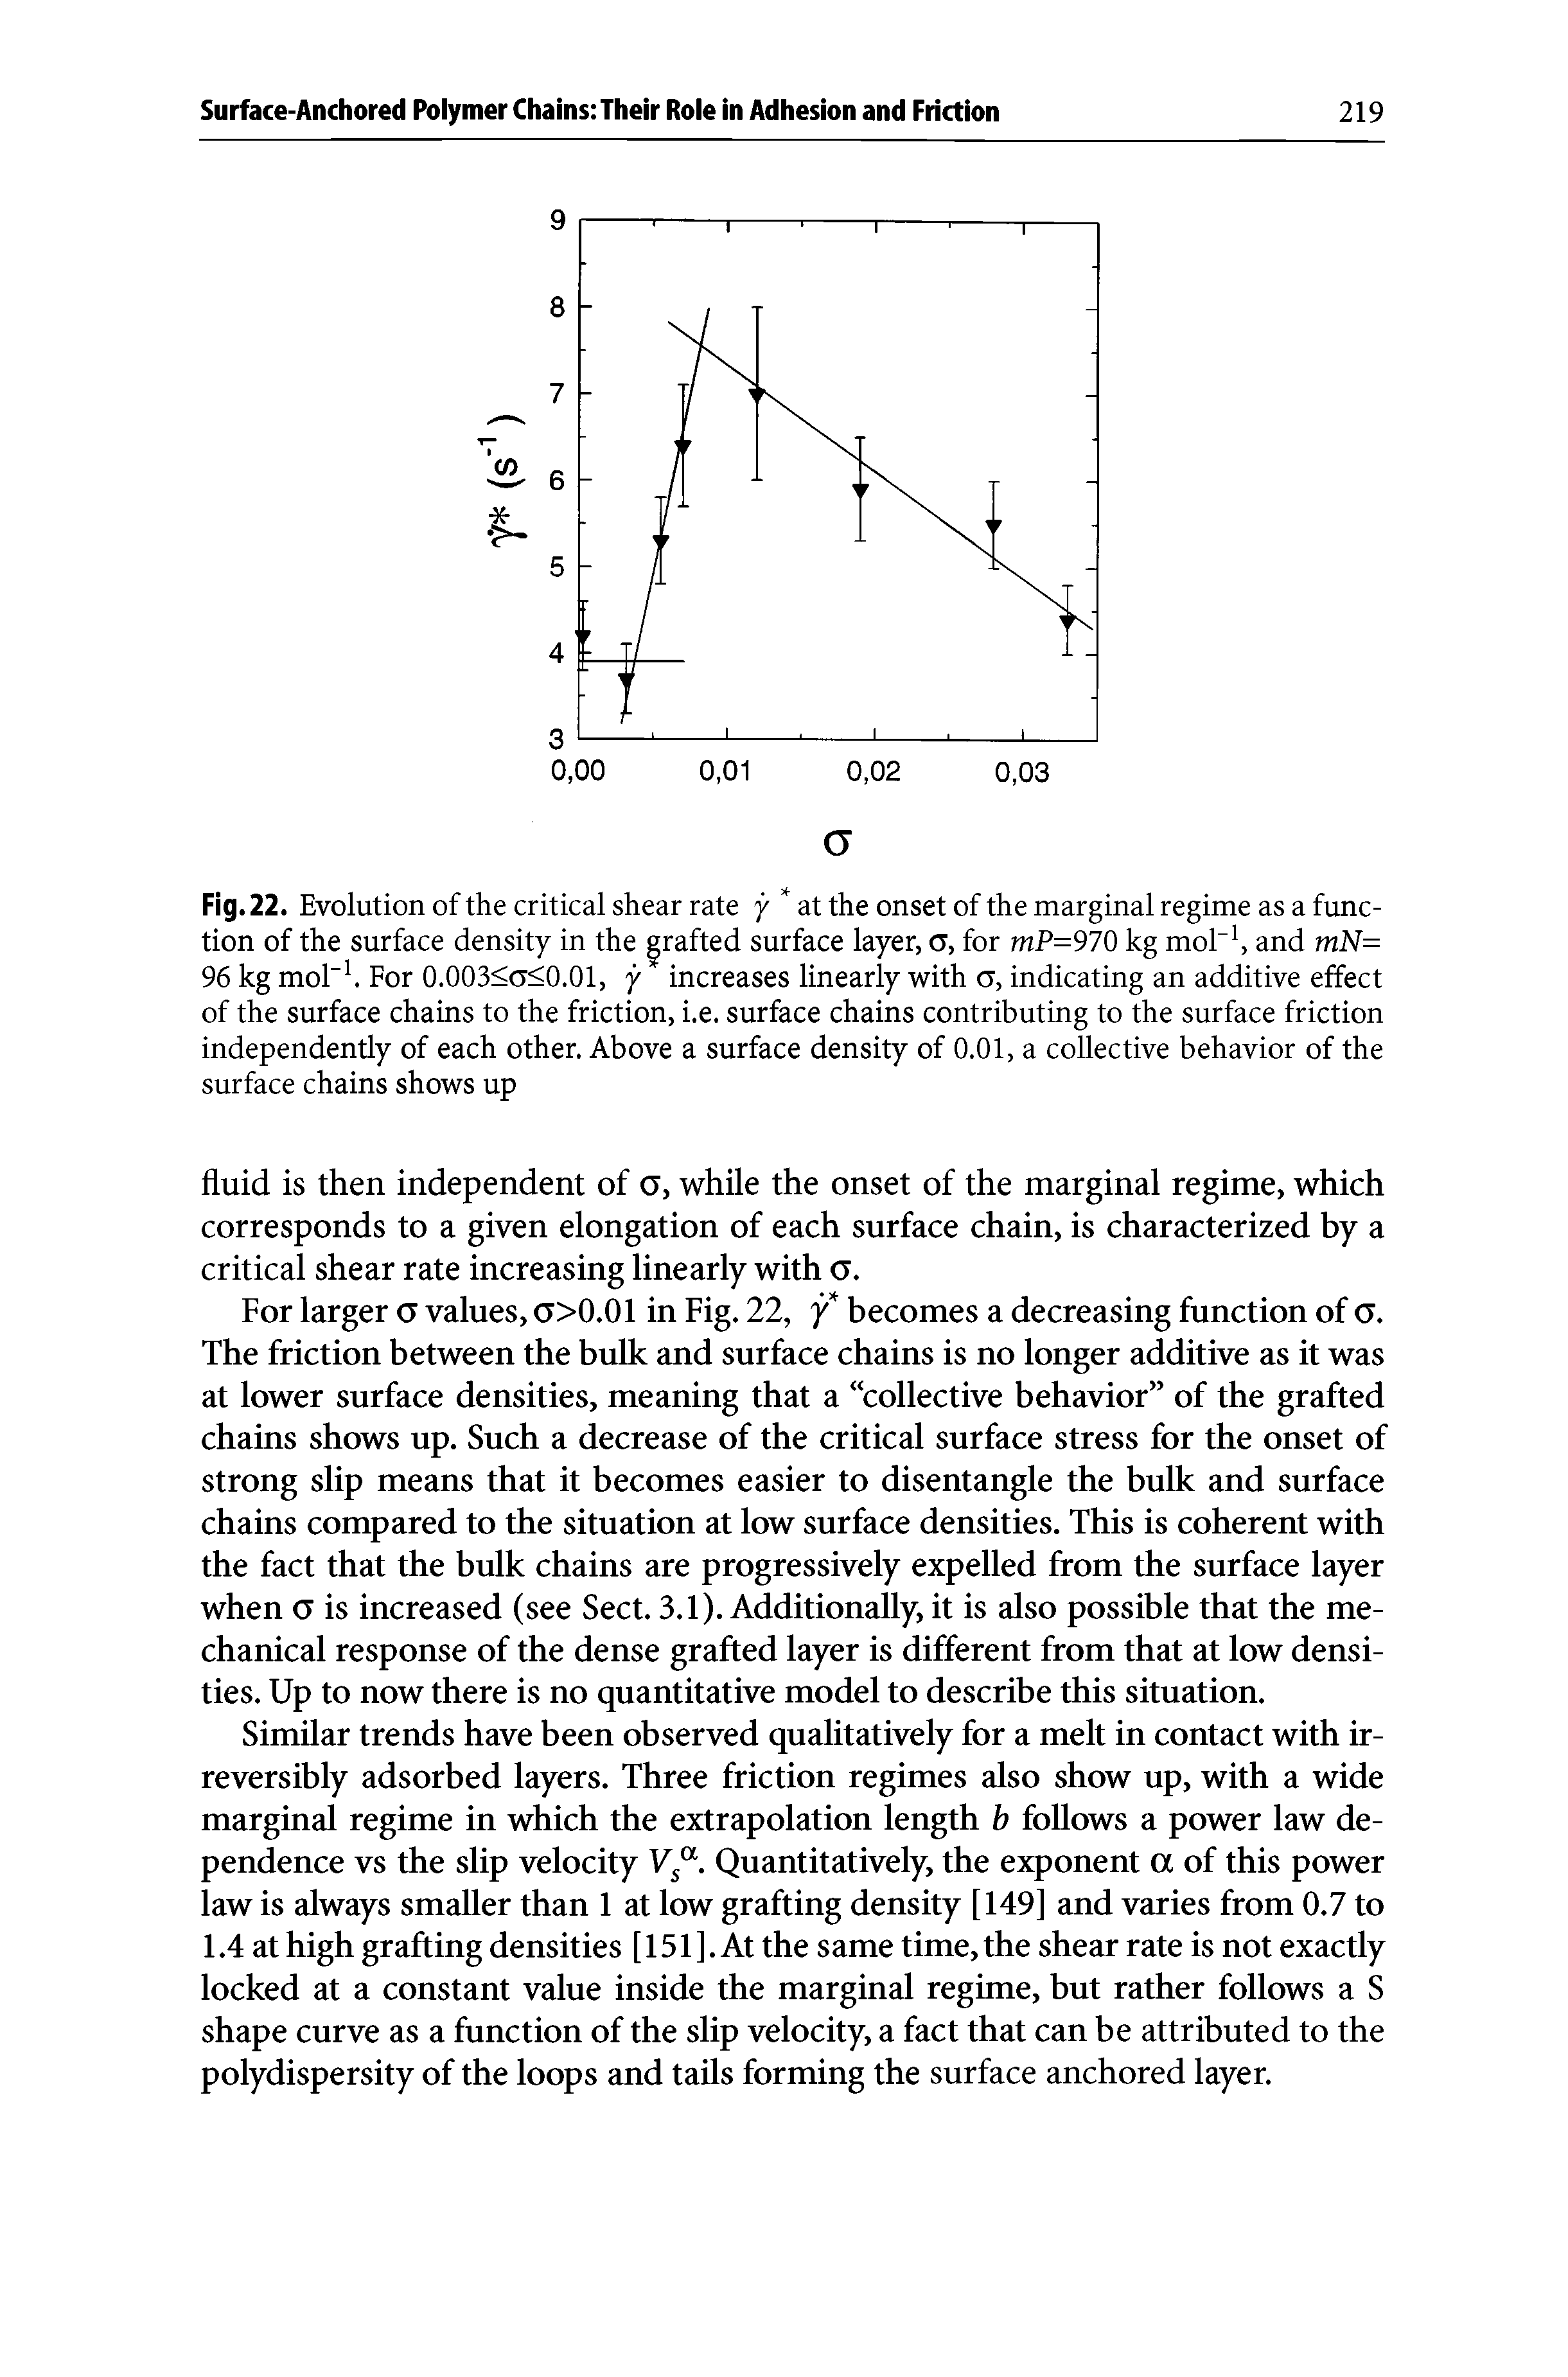 Fig.22. Evolution of the critical shear rate y at the onset of the marginal regime as a function of the surface density in the grafted surface layer, o, for mP=970 kg mol-1, and mN= 96 kg mol-1. For 0.003<a<0.01, y increases linearly with o, indicating an additive effect of the surface chains to the friction, i.e. surface chains contributing to the surface friction independently of each other. Above a surface density of 0.01, a collective behavior of the surface chains shows up...